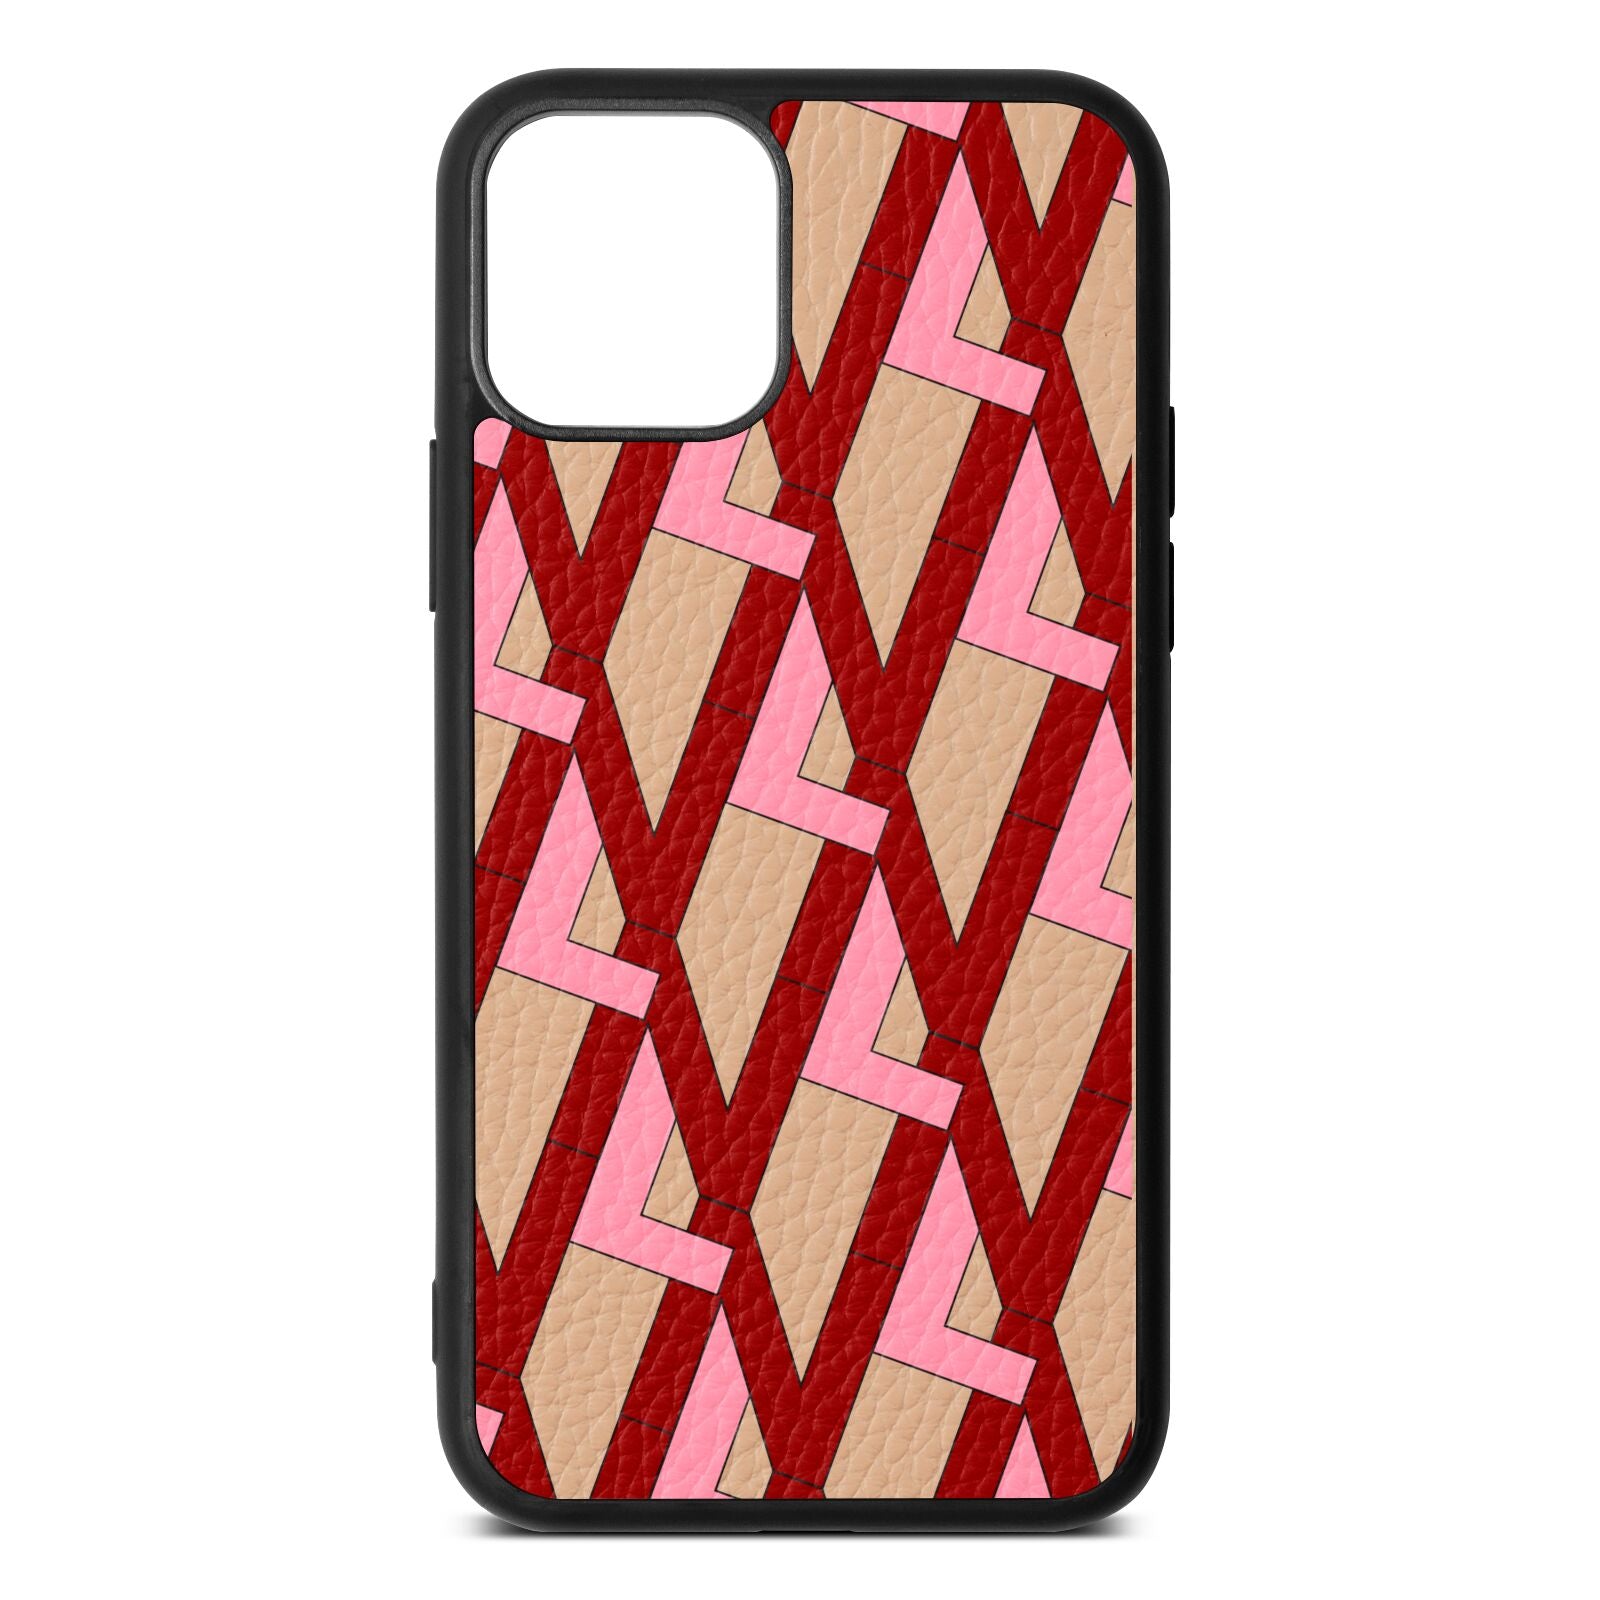 Logo Pebble Leather Nude iPhone Case – Dyefor